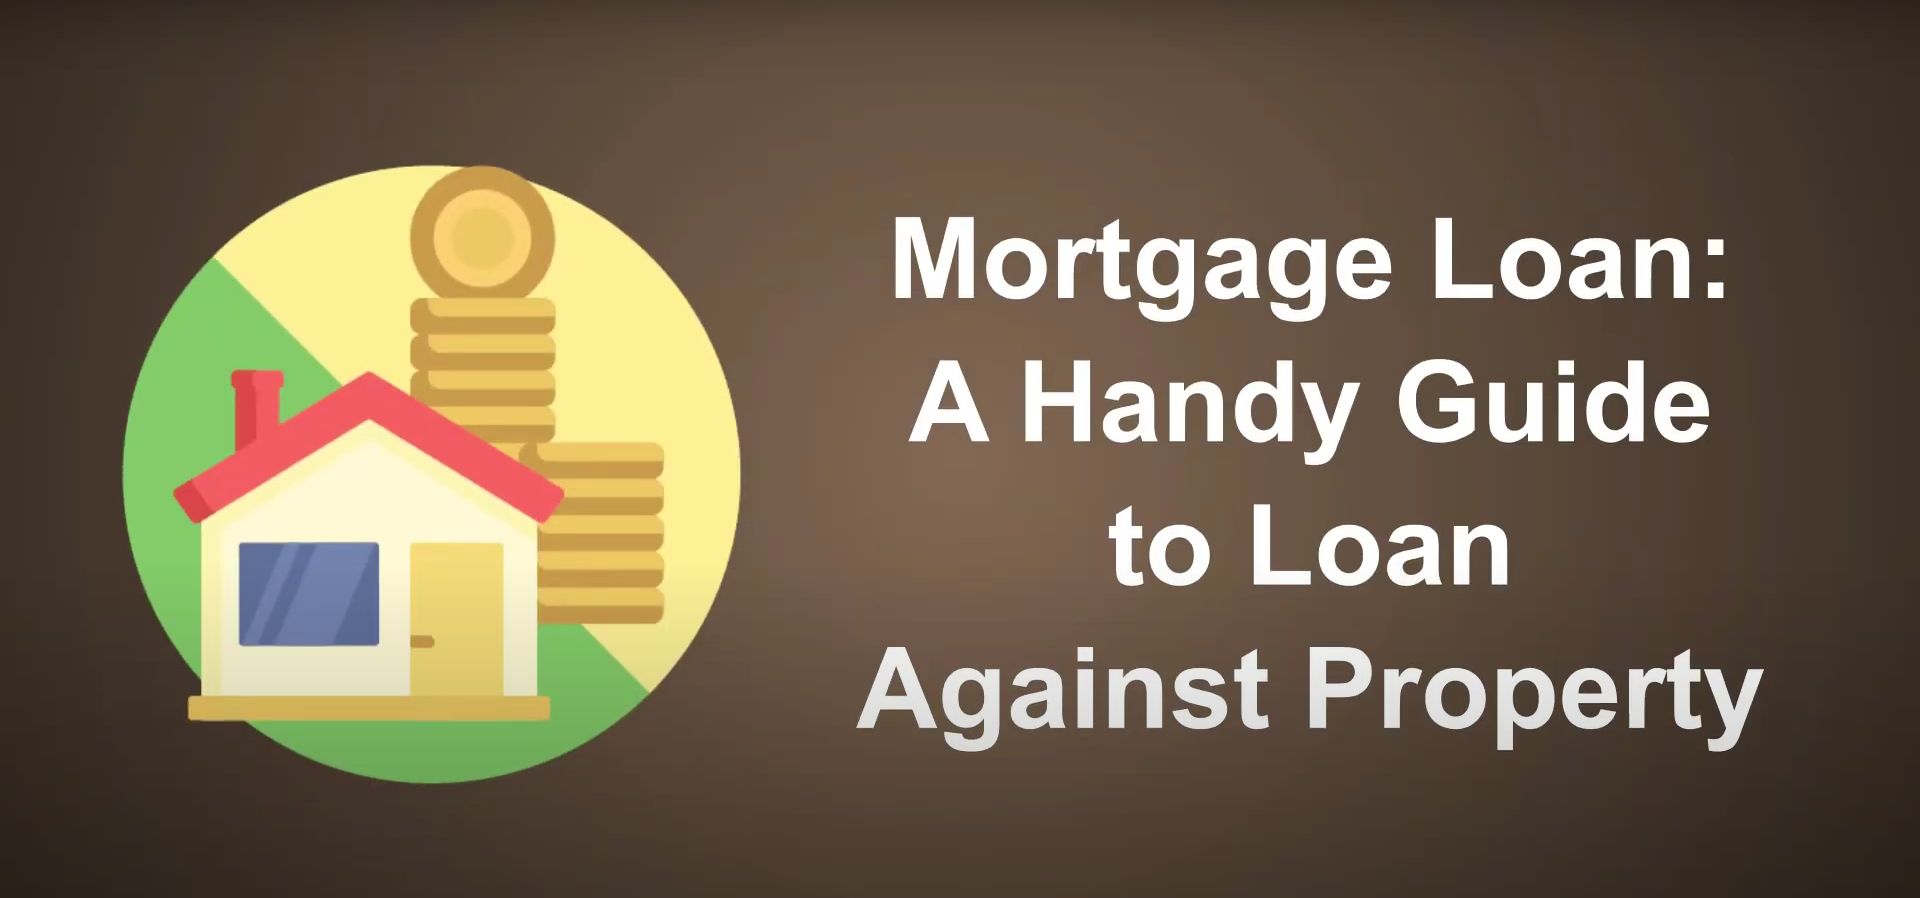 Mortgage Loan A Handy Guide to Loan Against Property